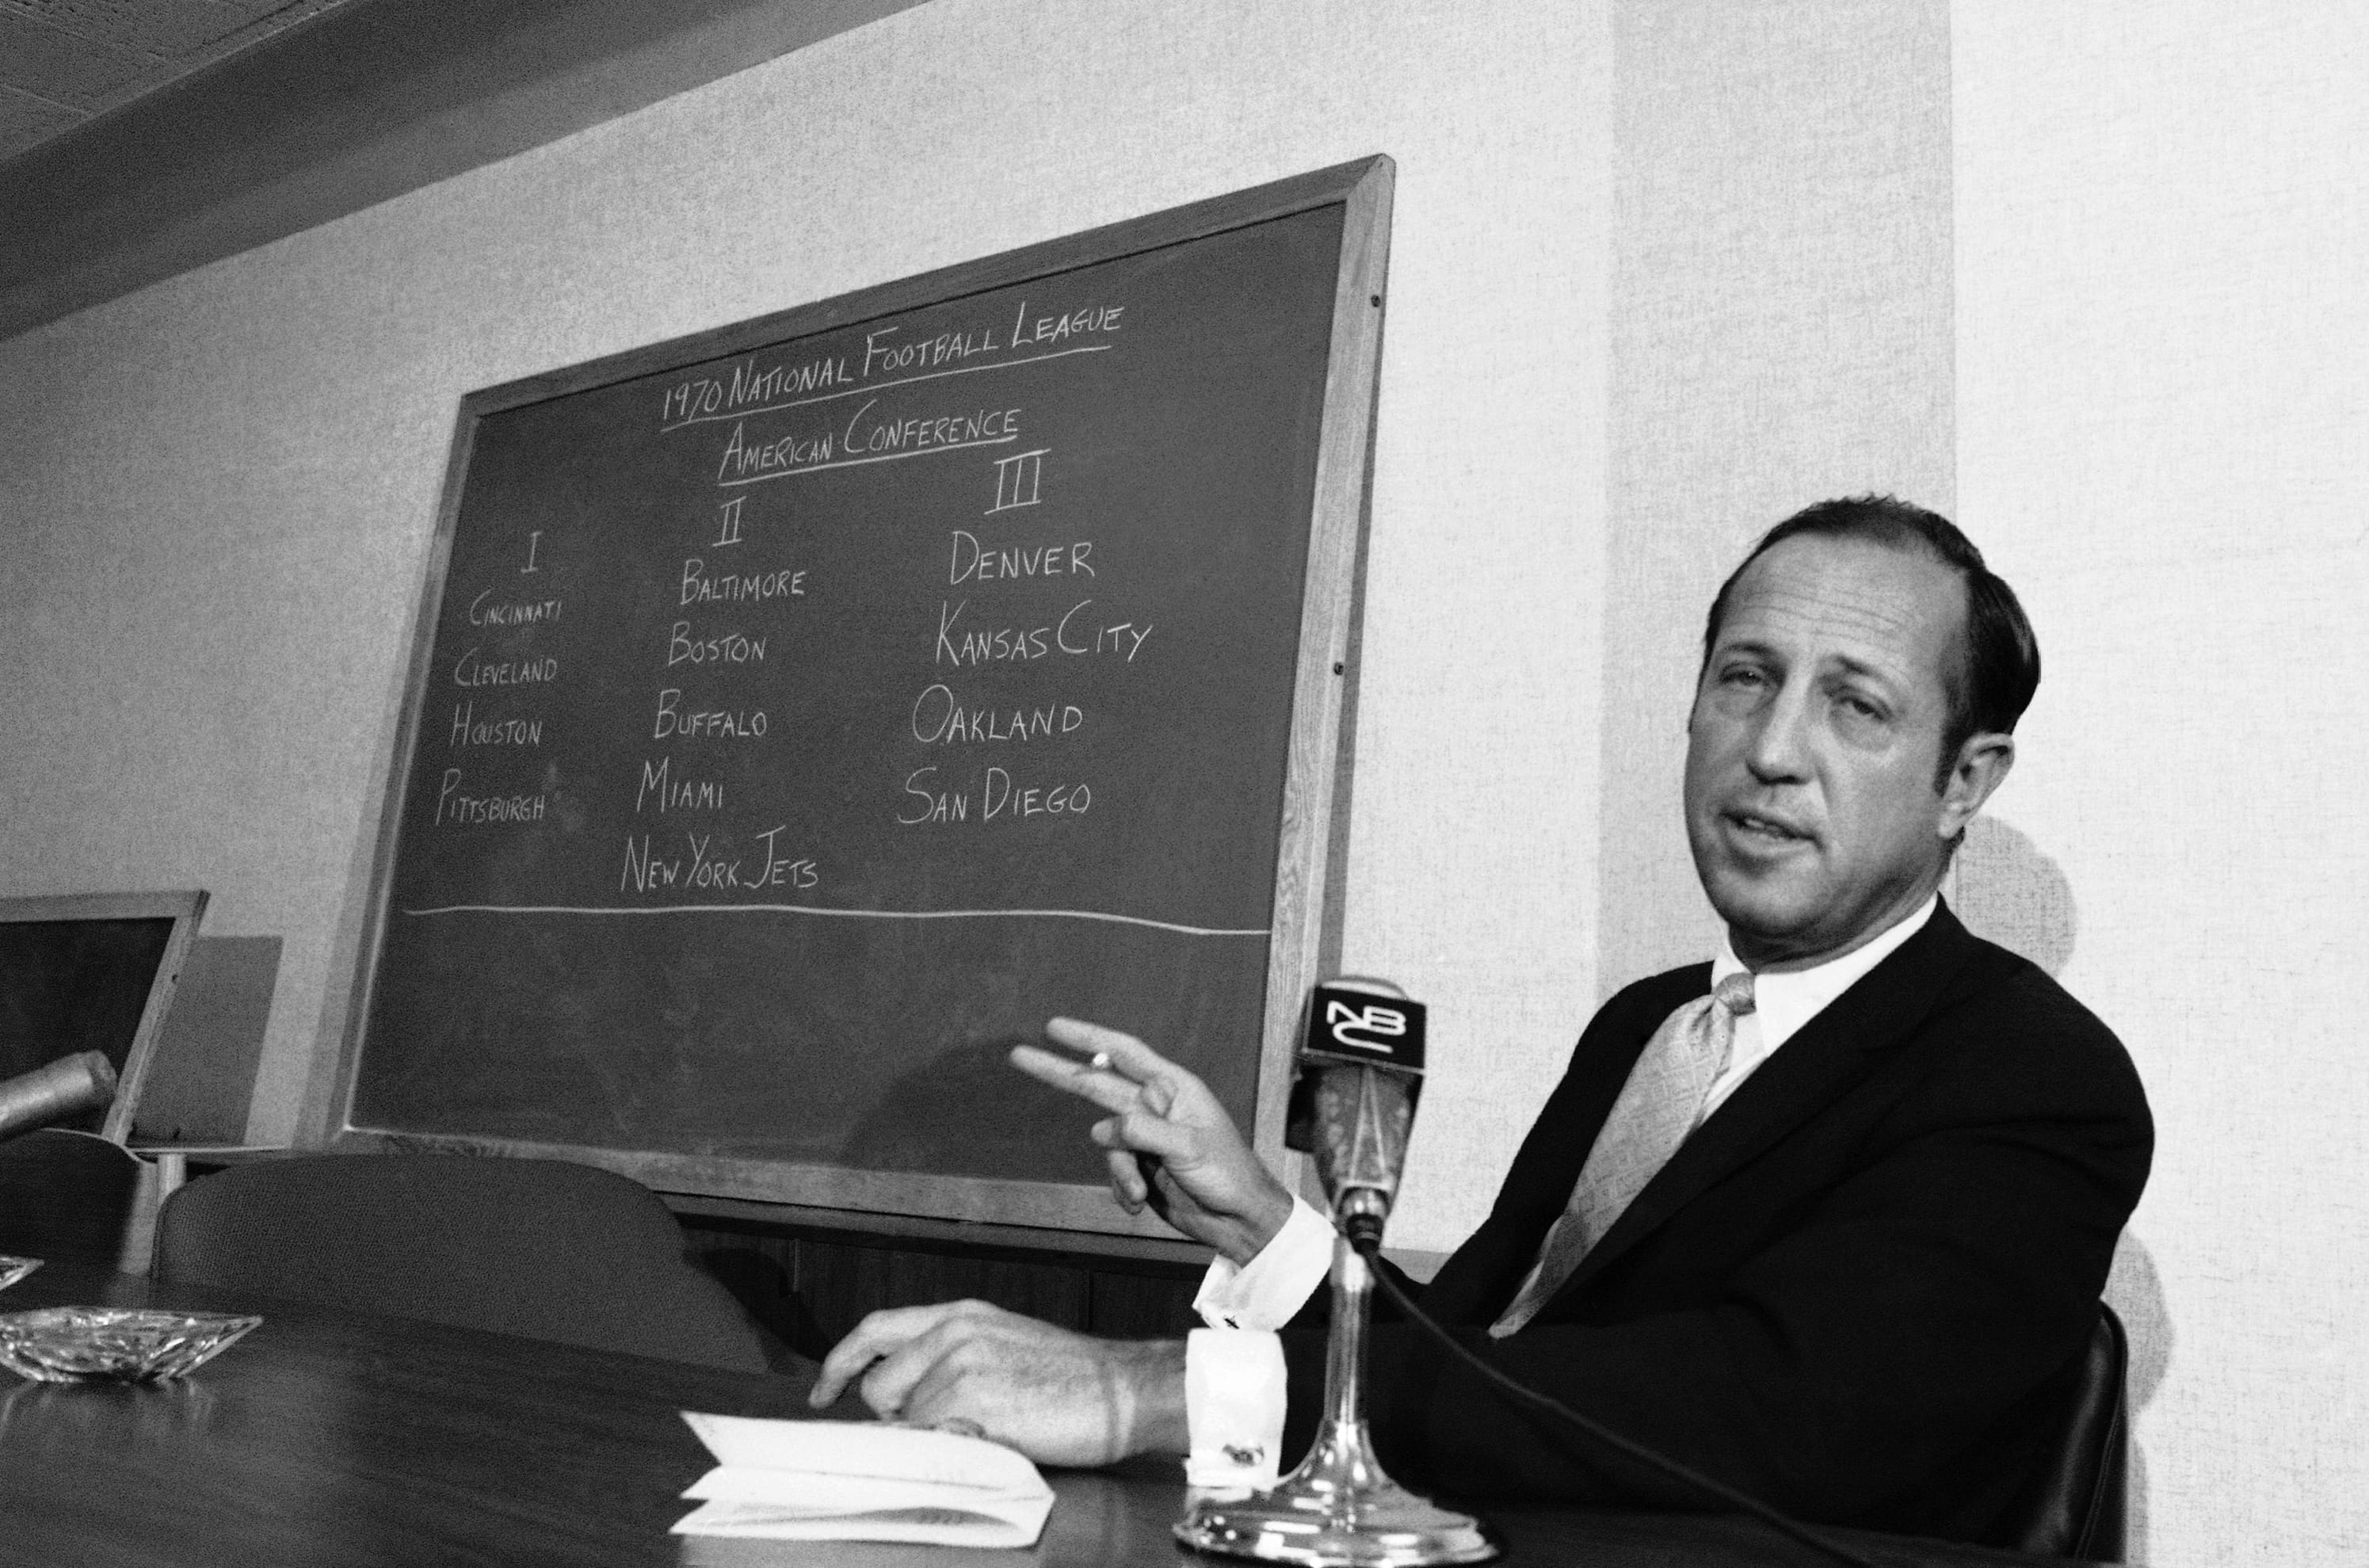 Speaking at a news conference in 1969, NFL commissioner Pete Rozelle discusses team alignment under the NFL-AFL merger.